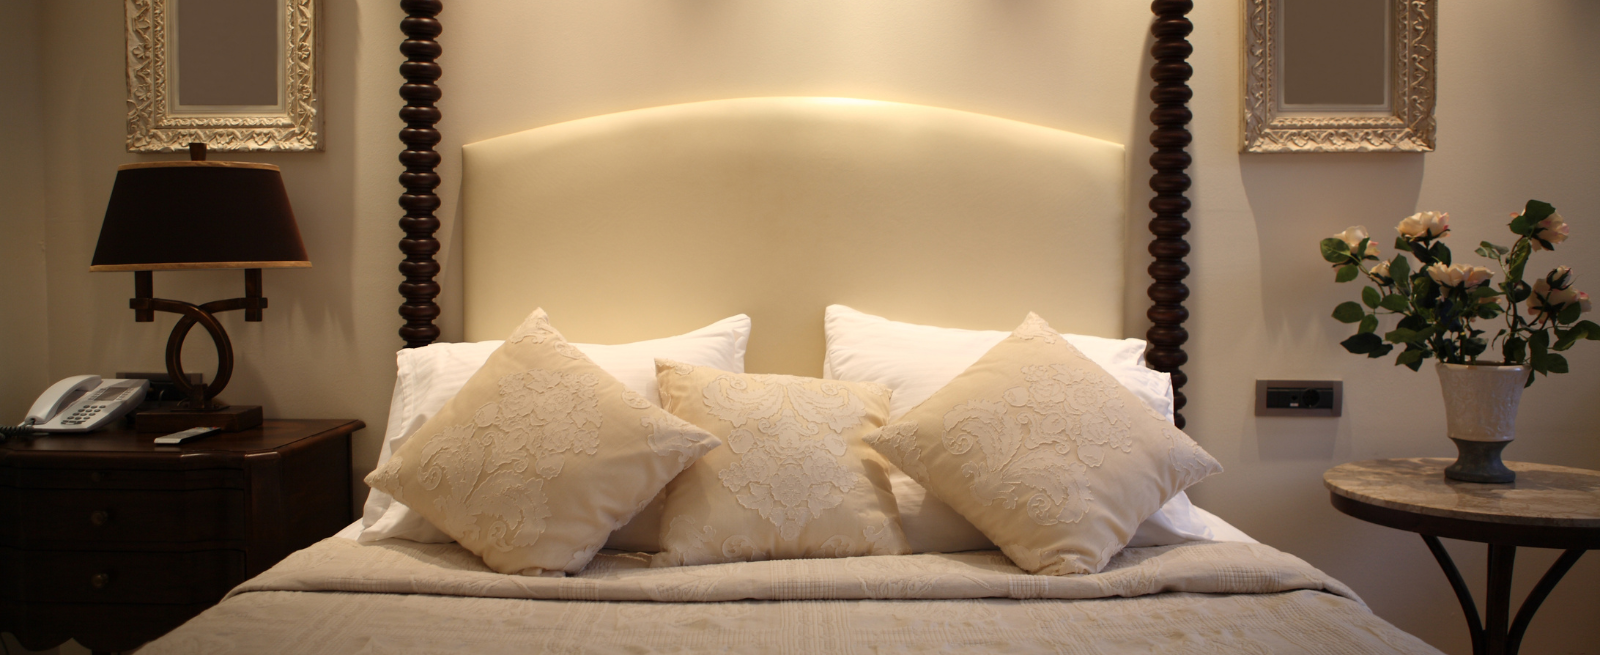 Hotel bed with fluffy pillows serene lighting